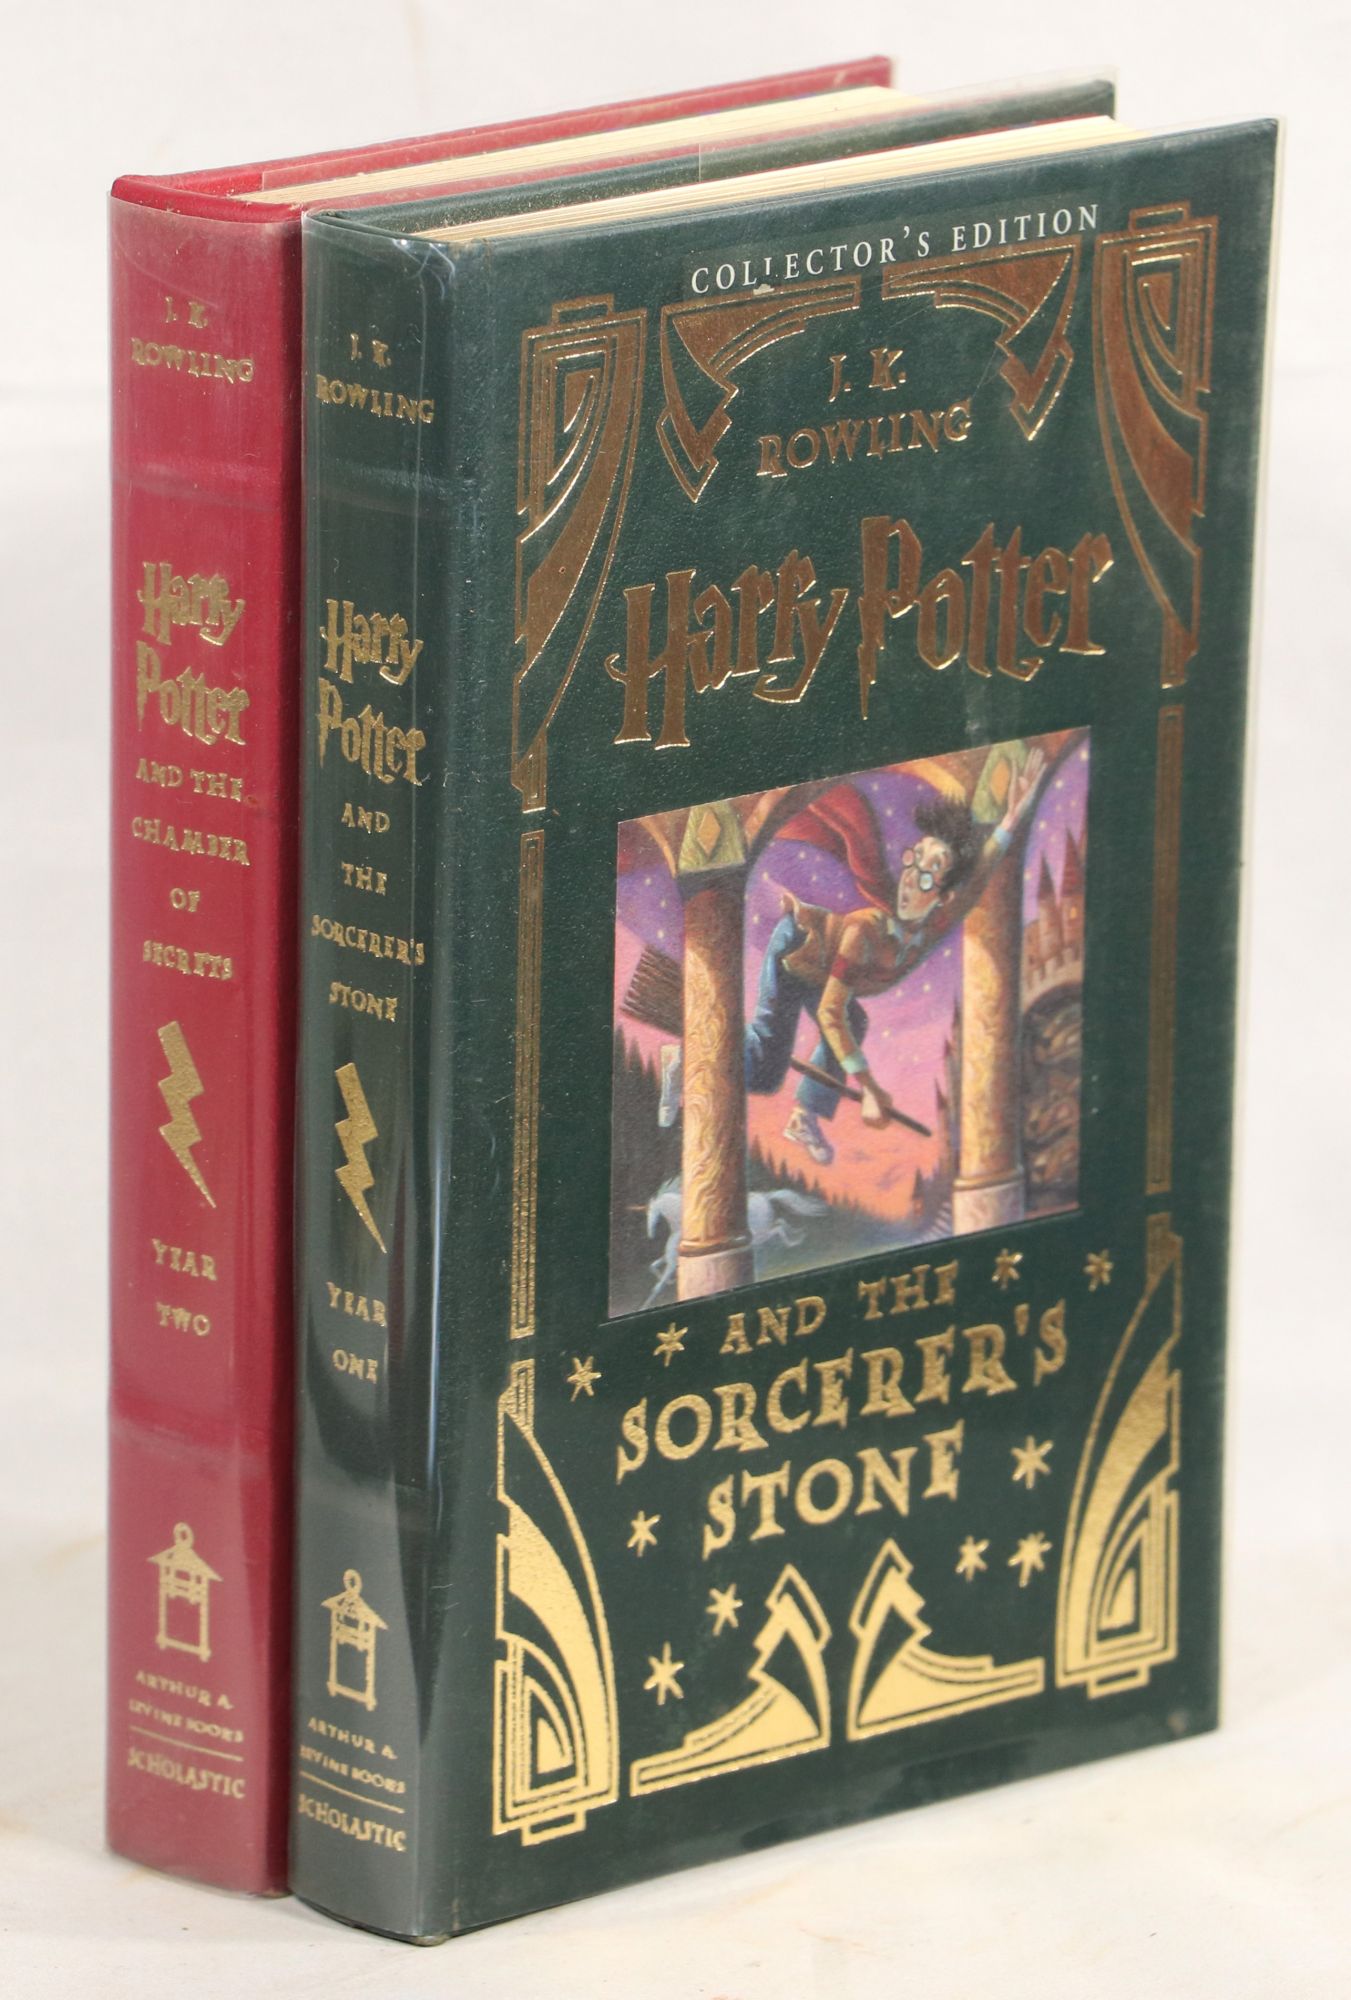 Harry Potter and the Sorcerers Stone by JK Rowling Scholastic 